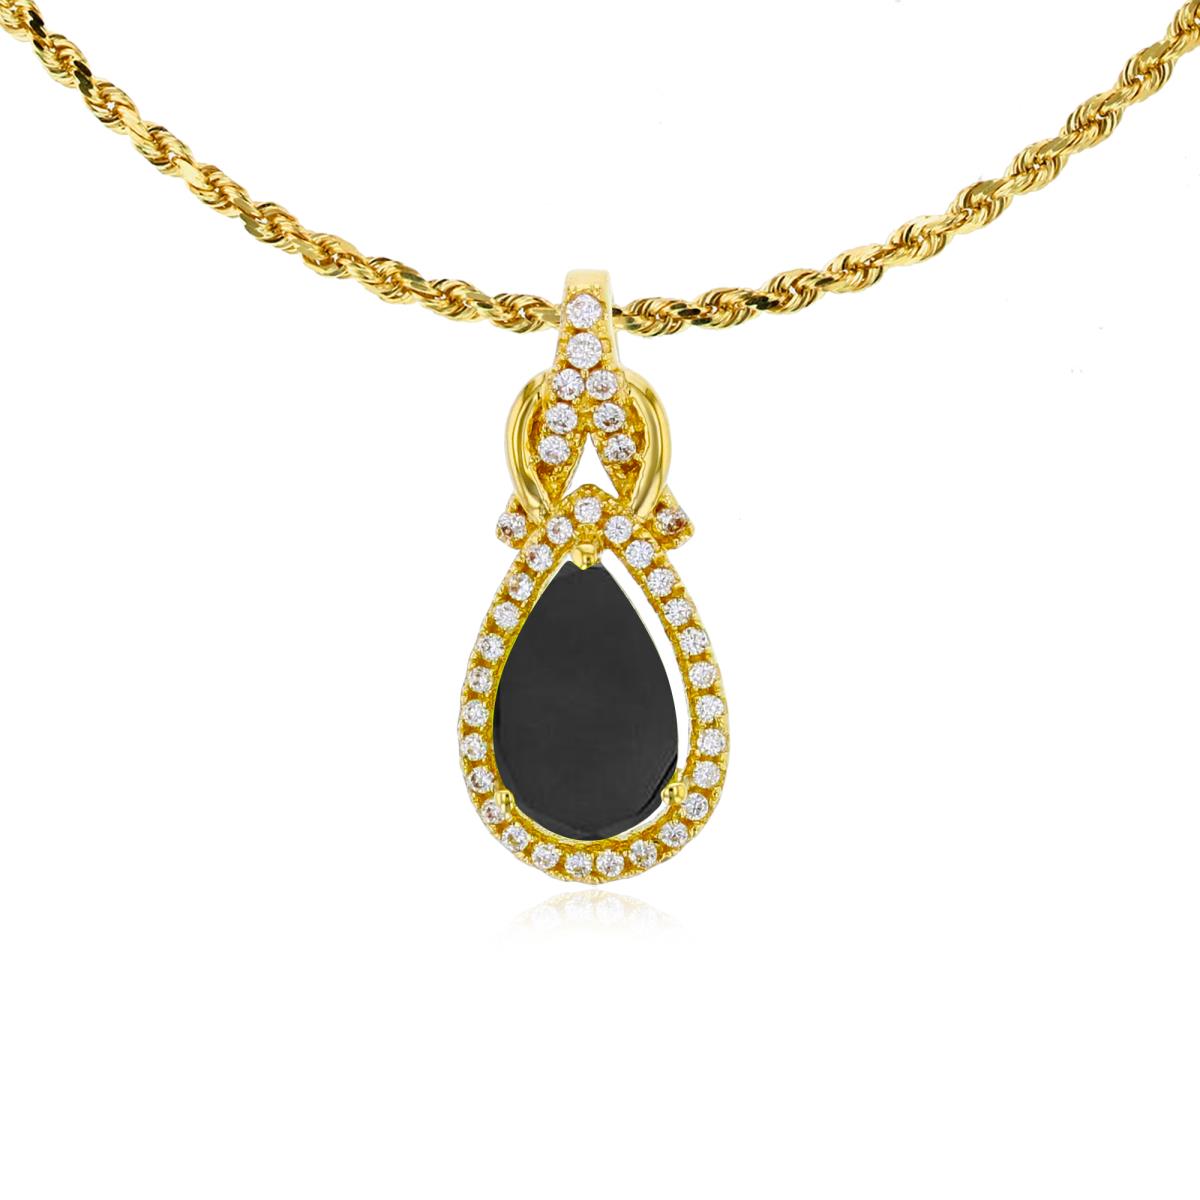 14K Yellow Gold 8x5mm Pear Cut Onyx & 0.11 CTTW Rnd Diamond Knot 18" Rope Chain Necklace